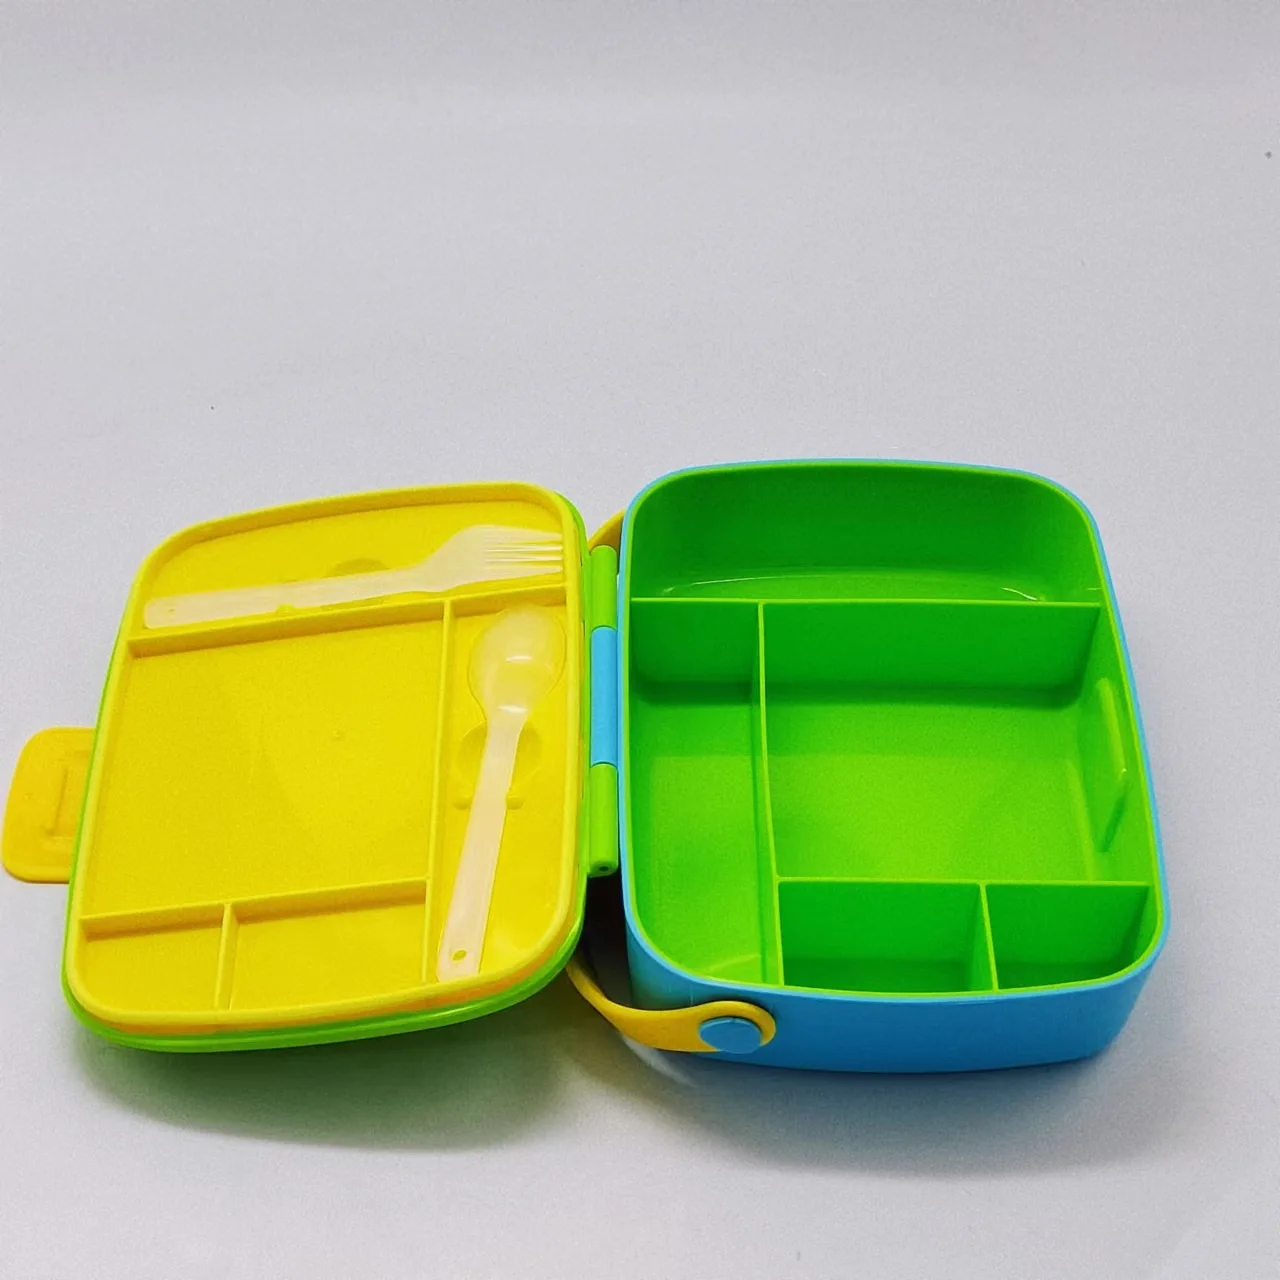 Wholesale Food safe BPA free 5 compartment leakproof plastic